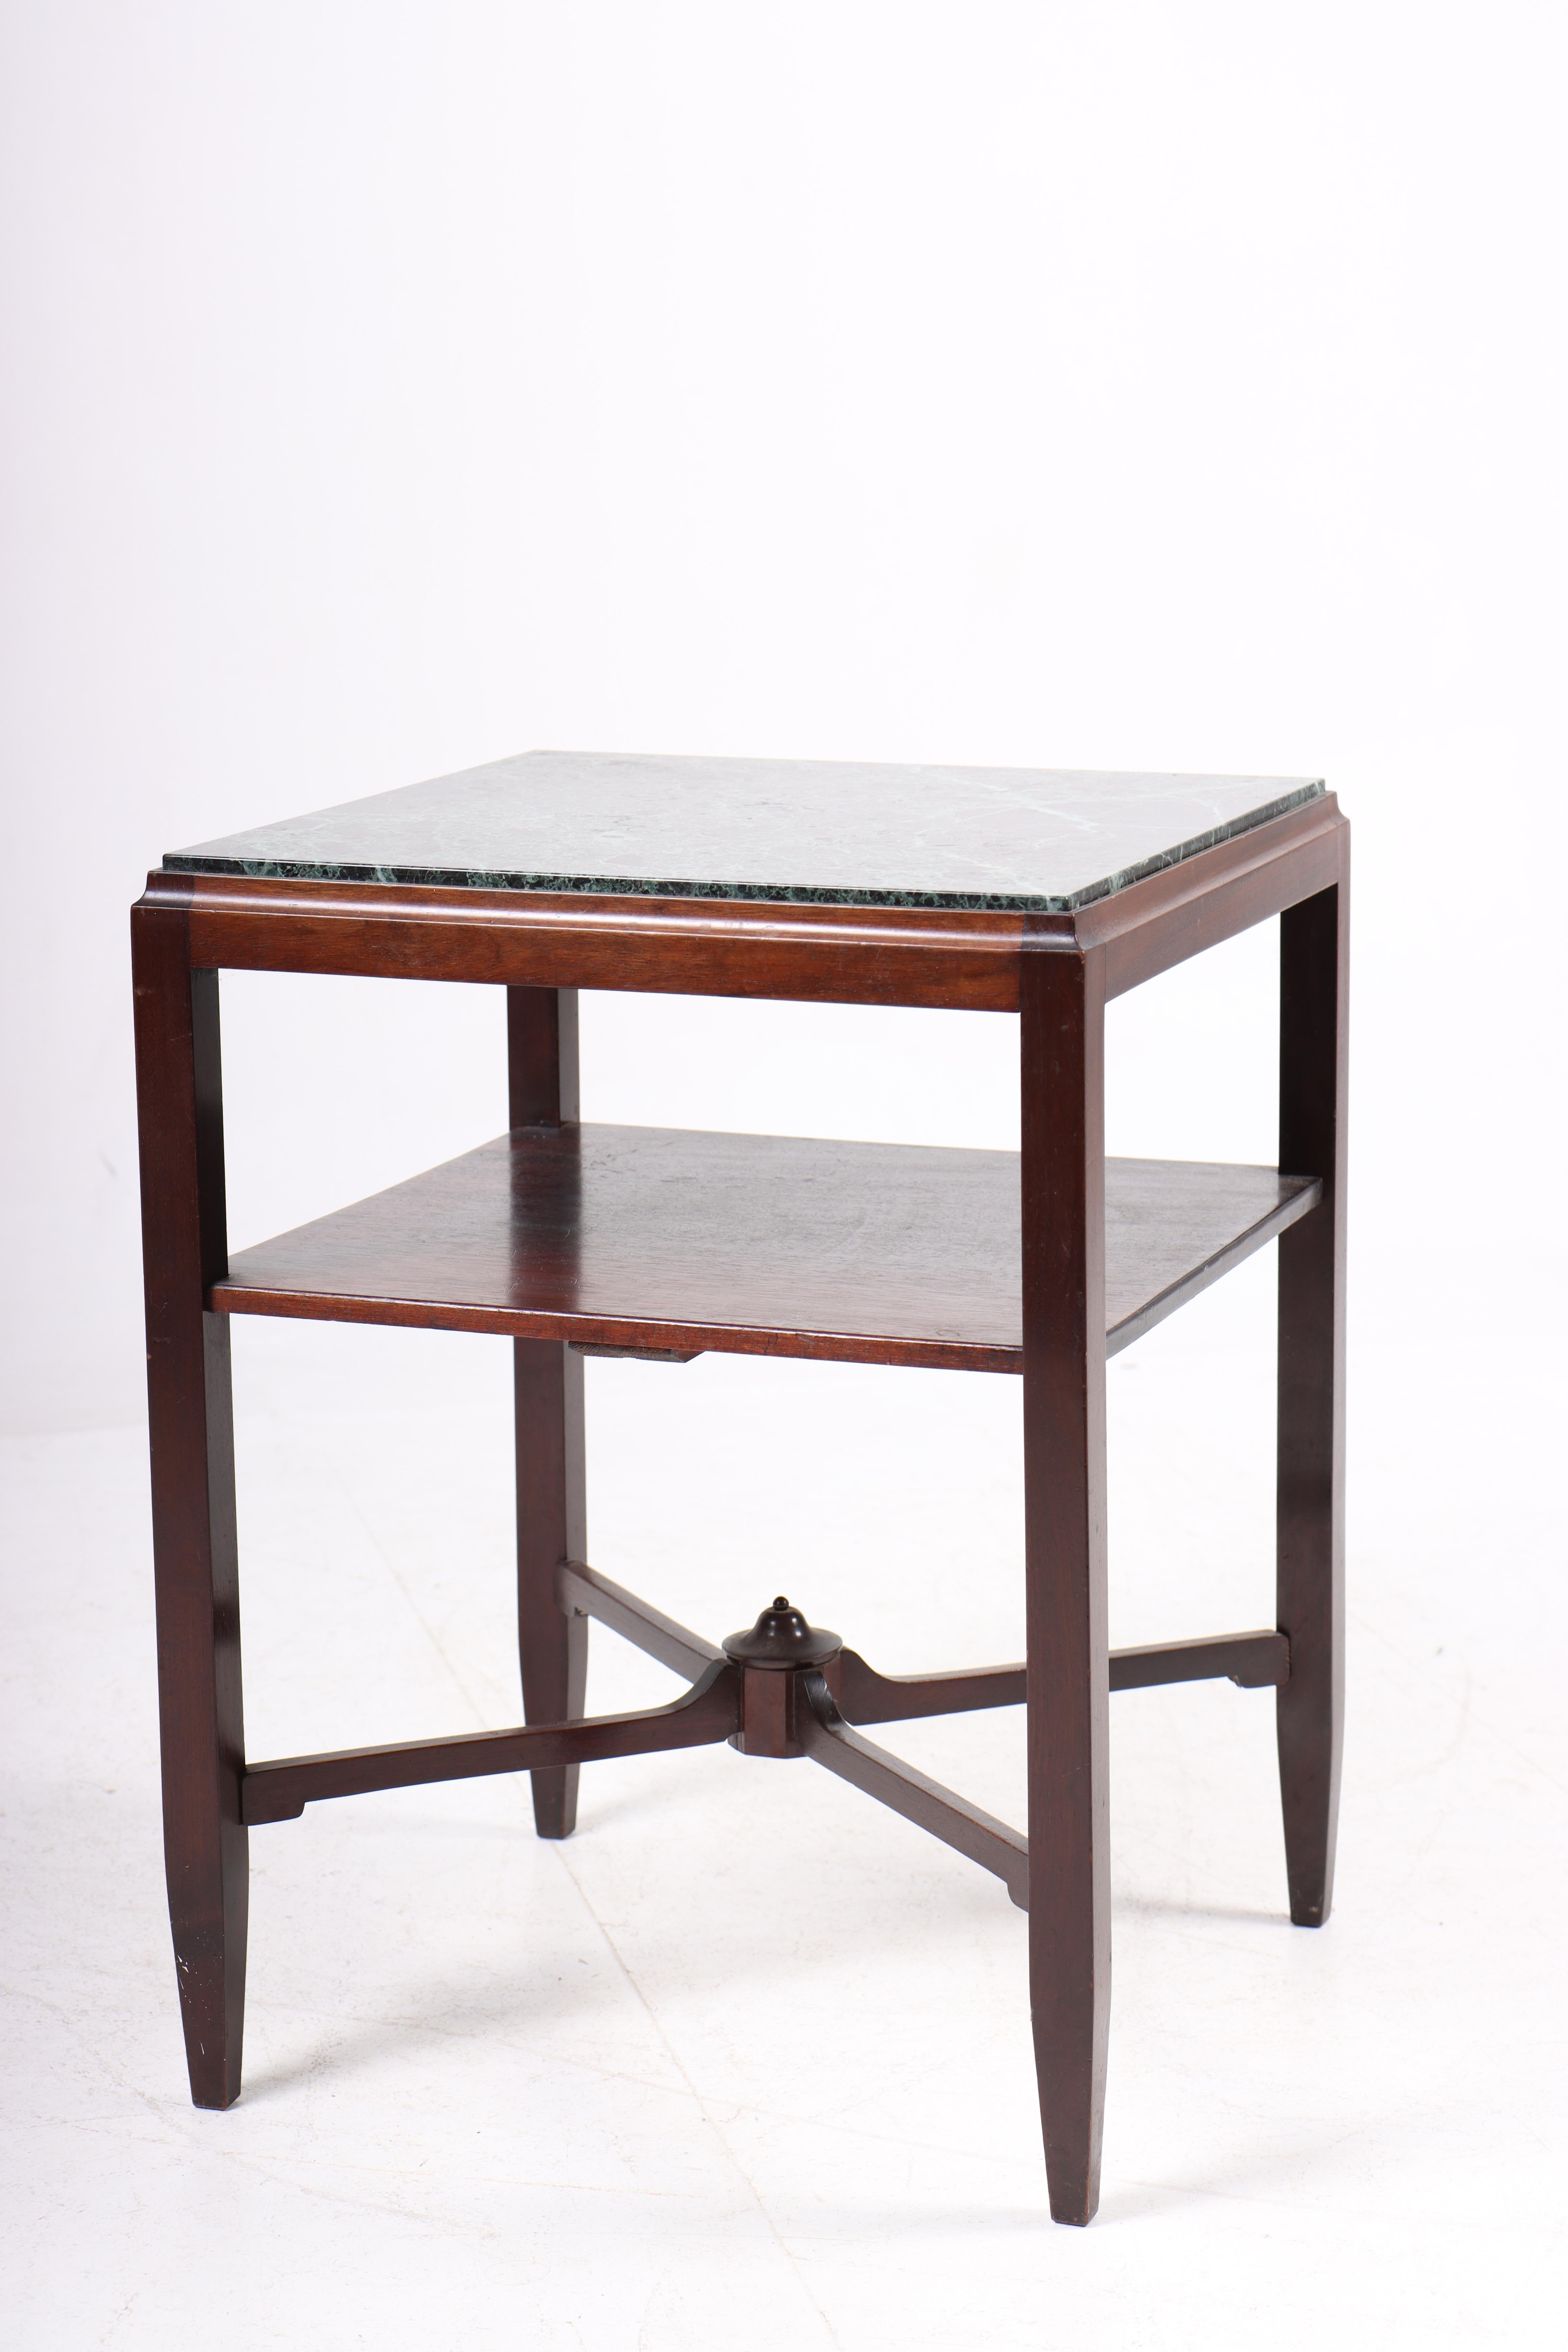 Low Table in Mahogany and Marble, Made in Denmark, 1930s For Sale 2